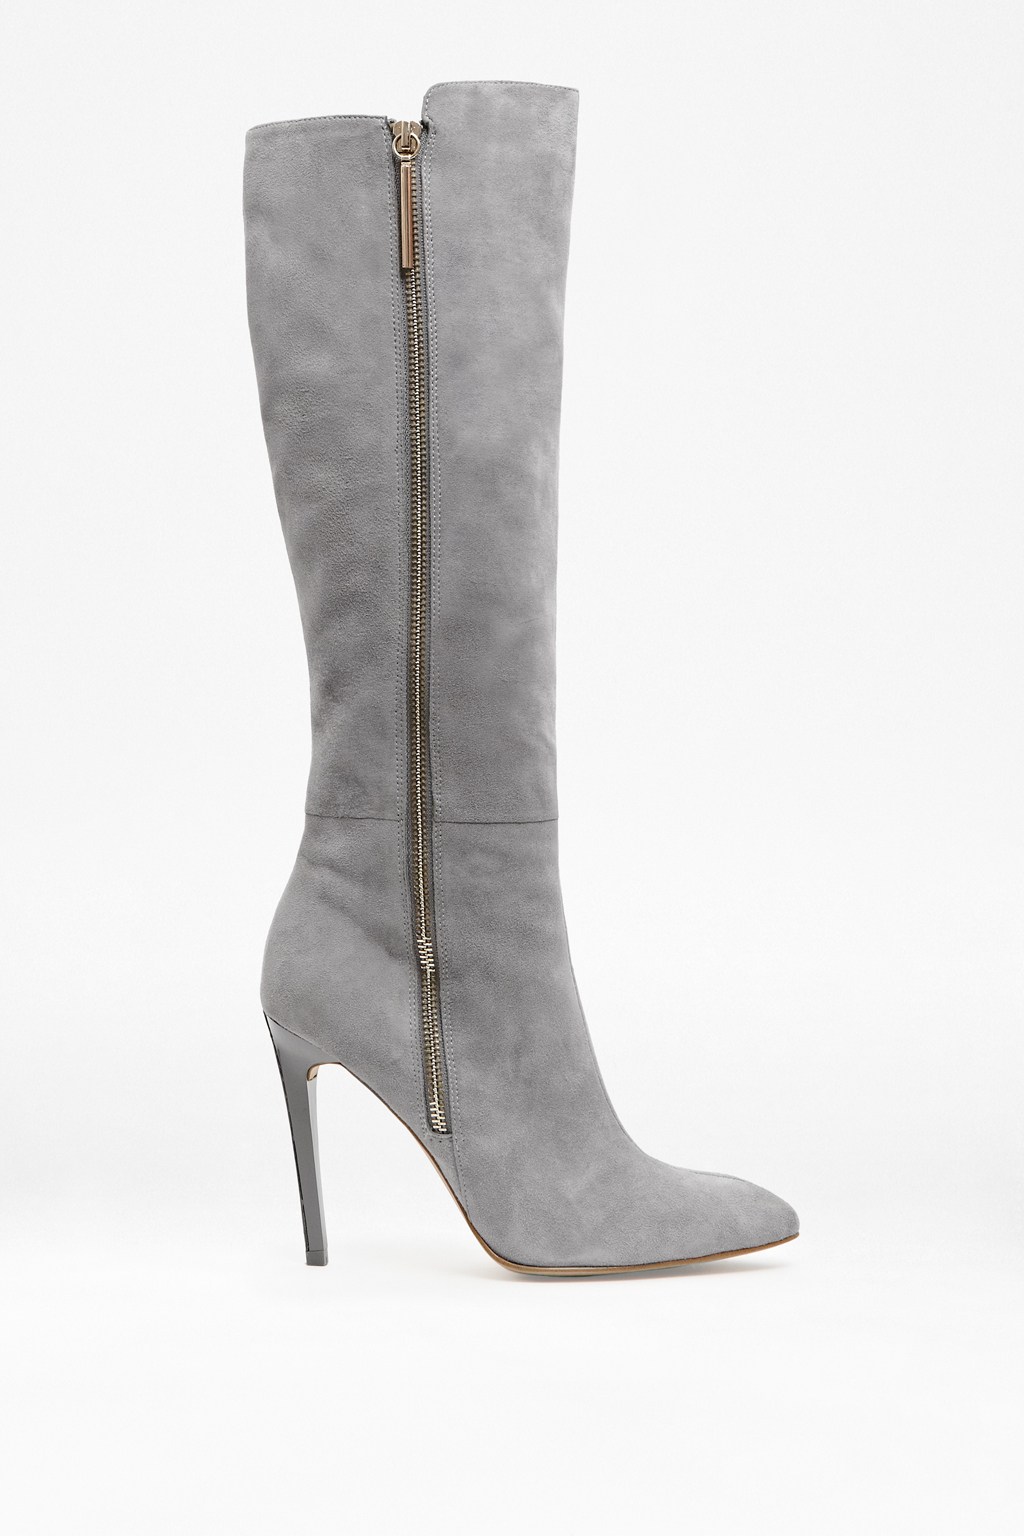 Molly-Suede-Knee-High-Boots